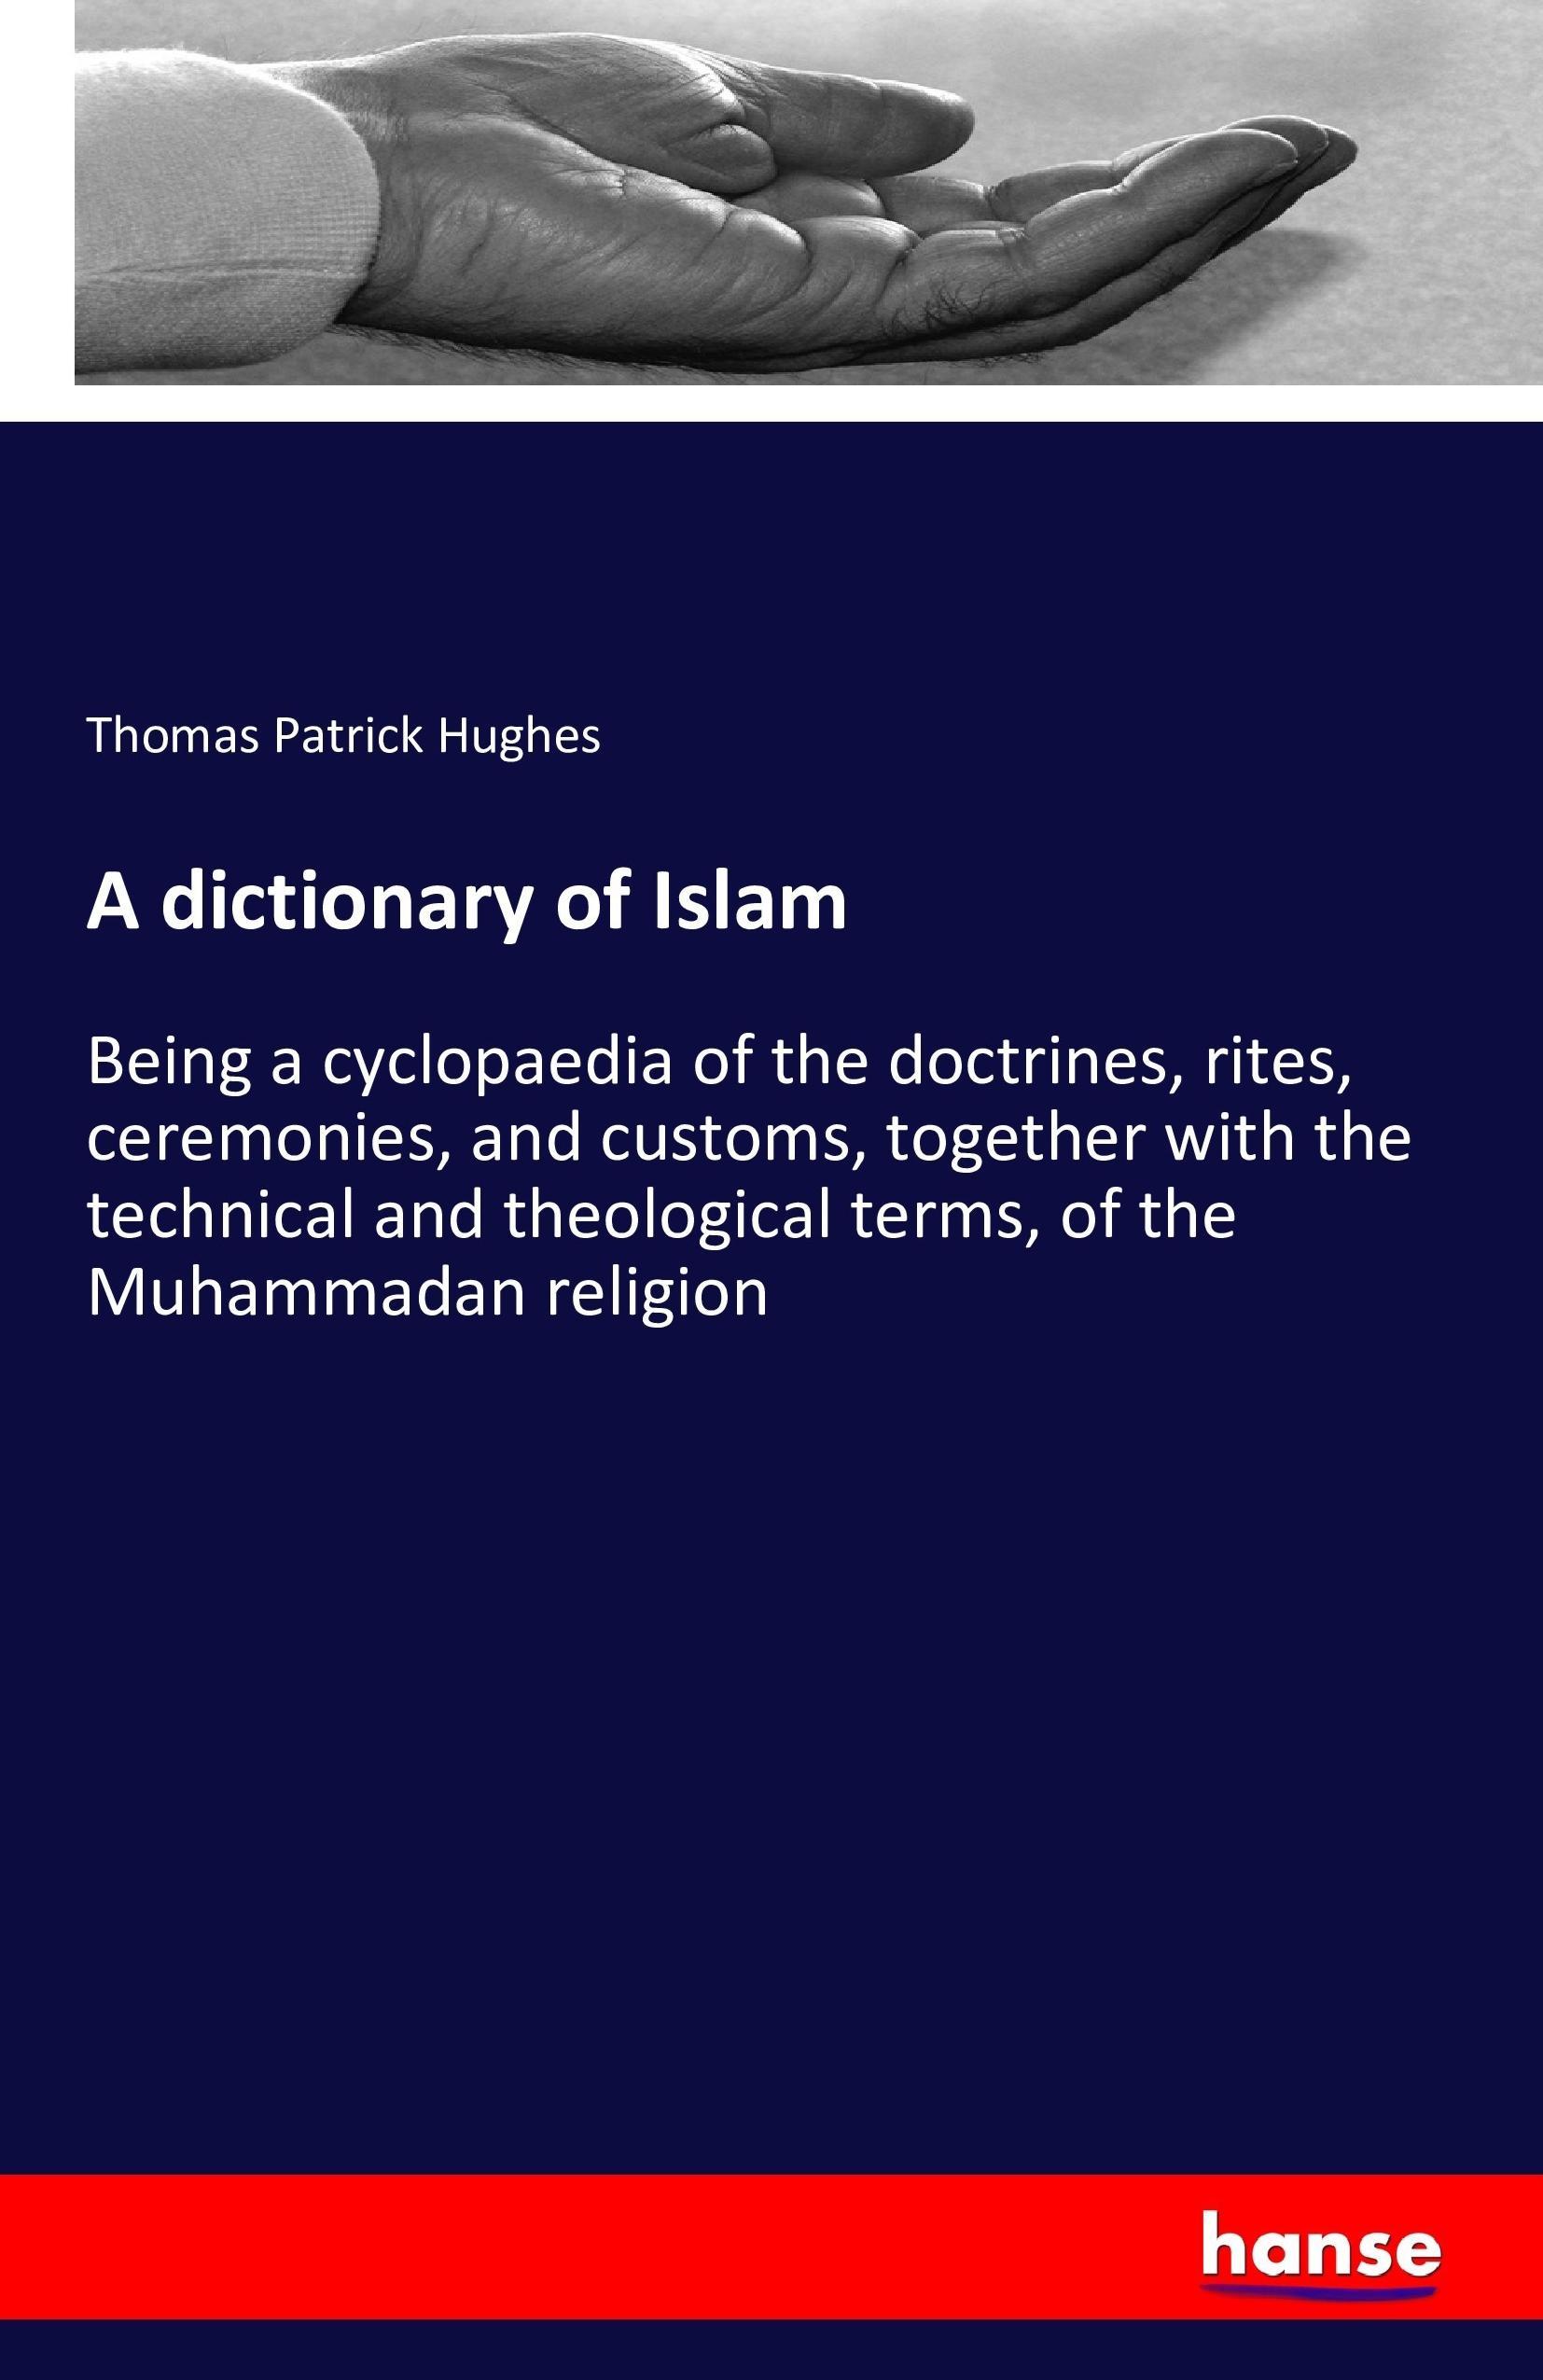 A dictionary of Islam | Being a cyclopaedia of the doctrines, rites, ceremonies, and customs, together with the technical and theological terms, of the Muhammadan religion | Thomas Patrick Hughes - Hughes, Thomas Patrick